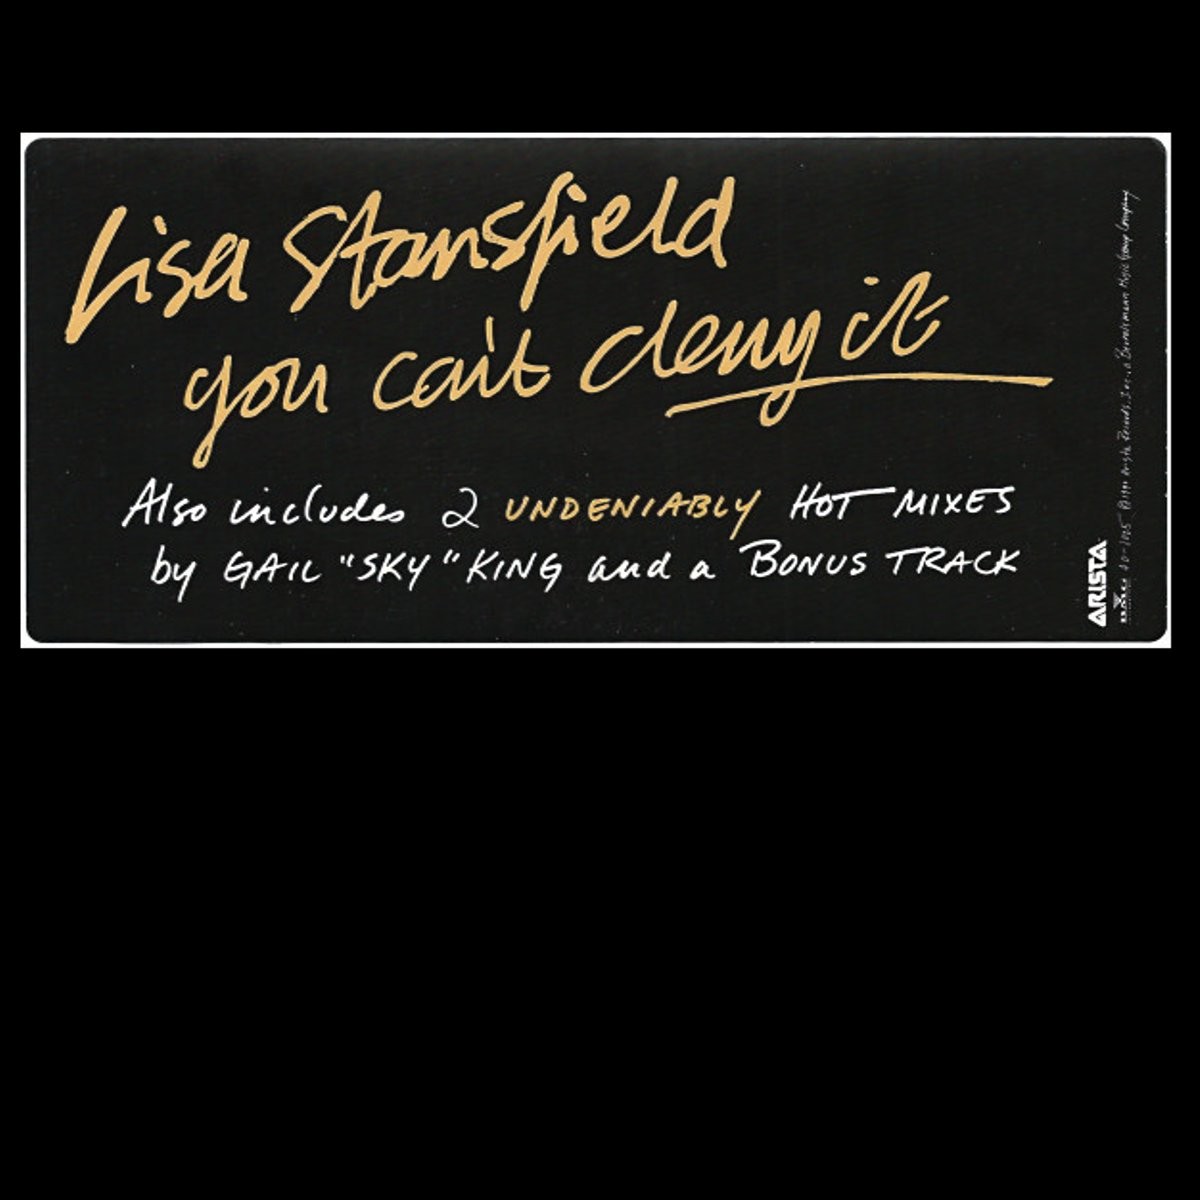 Lisa Stansfield - You cant deny it (Extended Mix / Single Mix / Gail Sky King Remix) / Lay me down (Original) 12" Vinyl Record